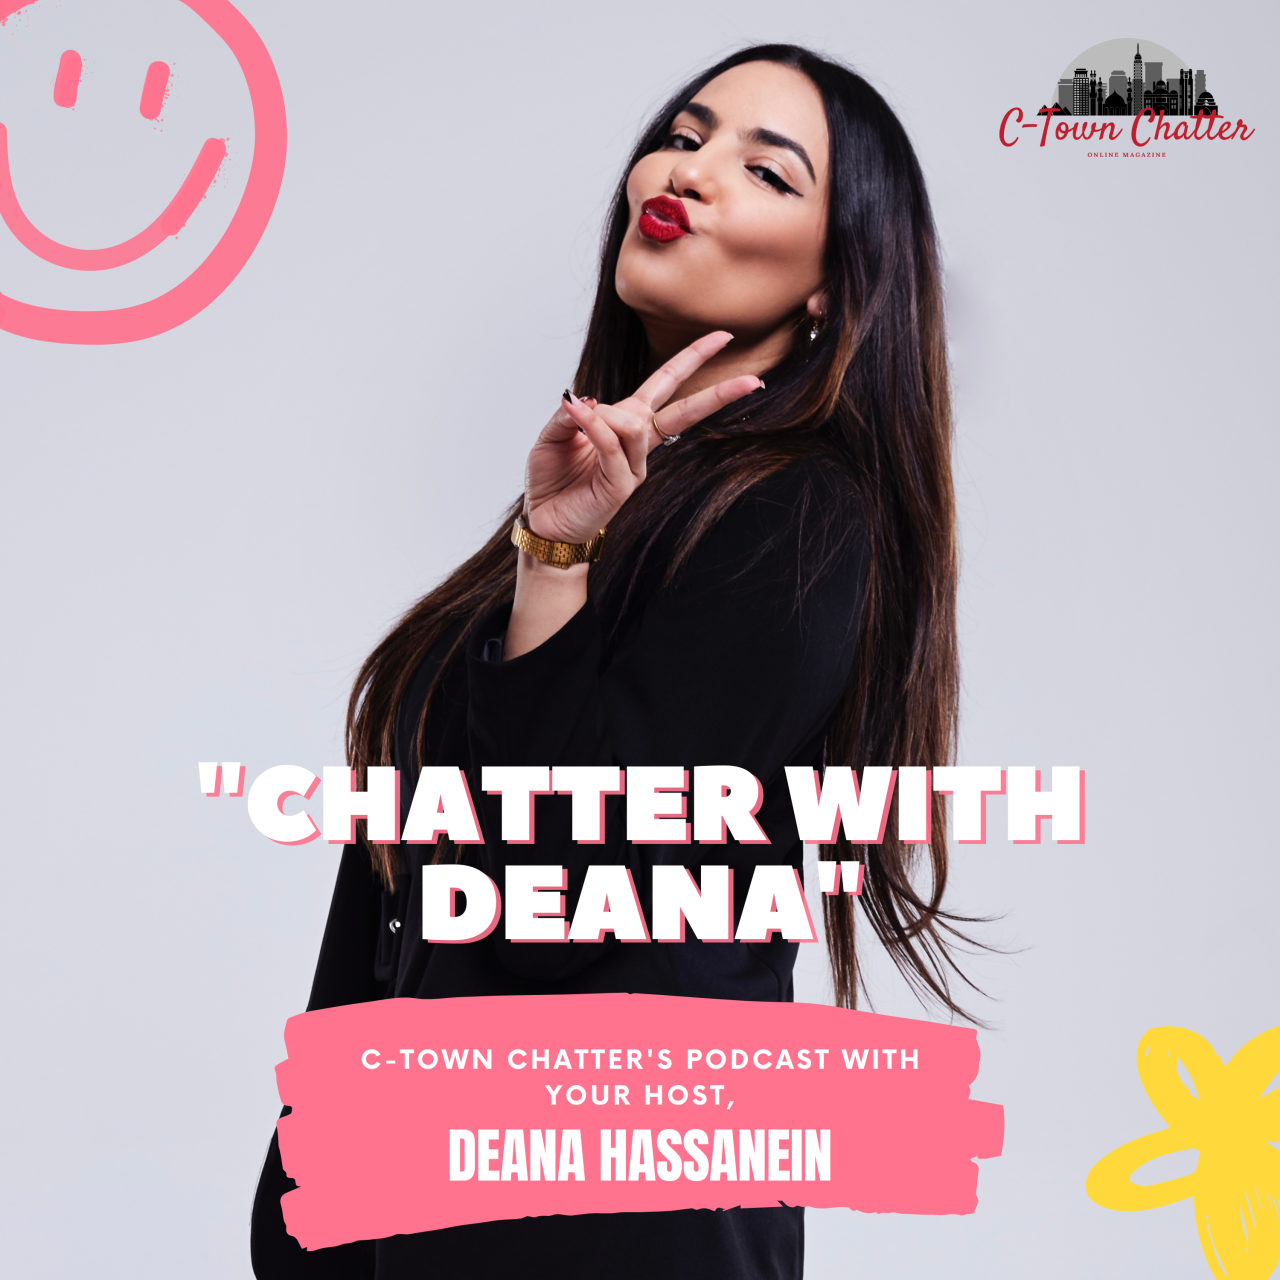 chatter with deana Hassanein c town chatter podcast 